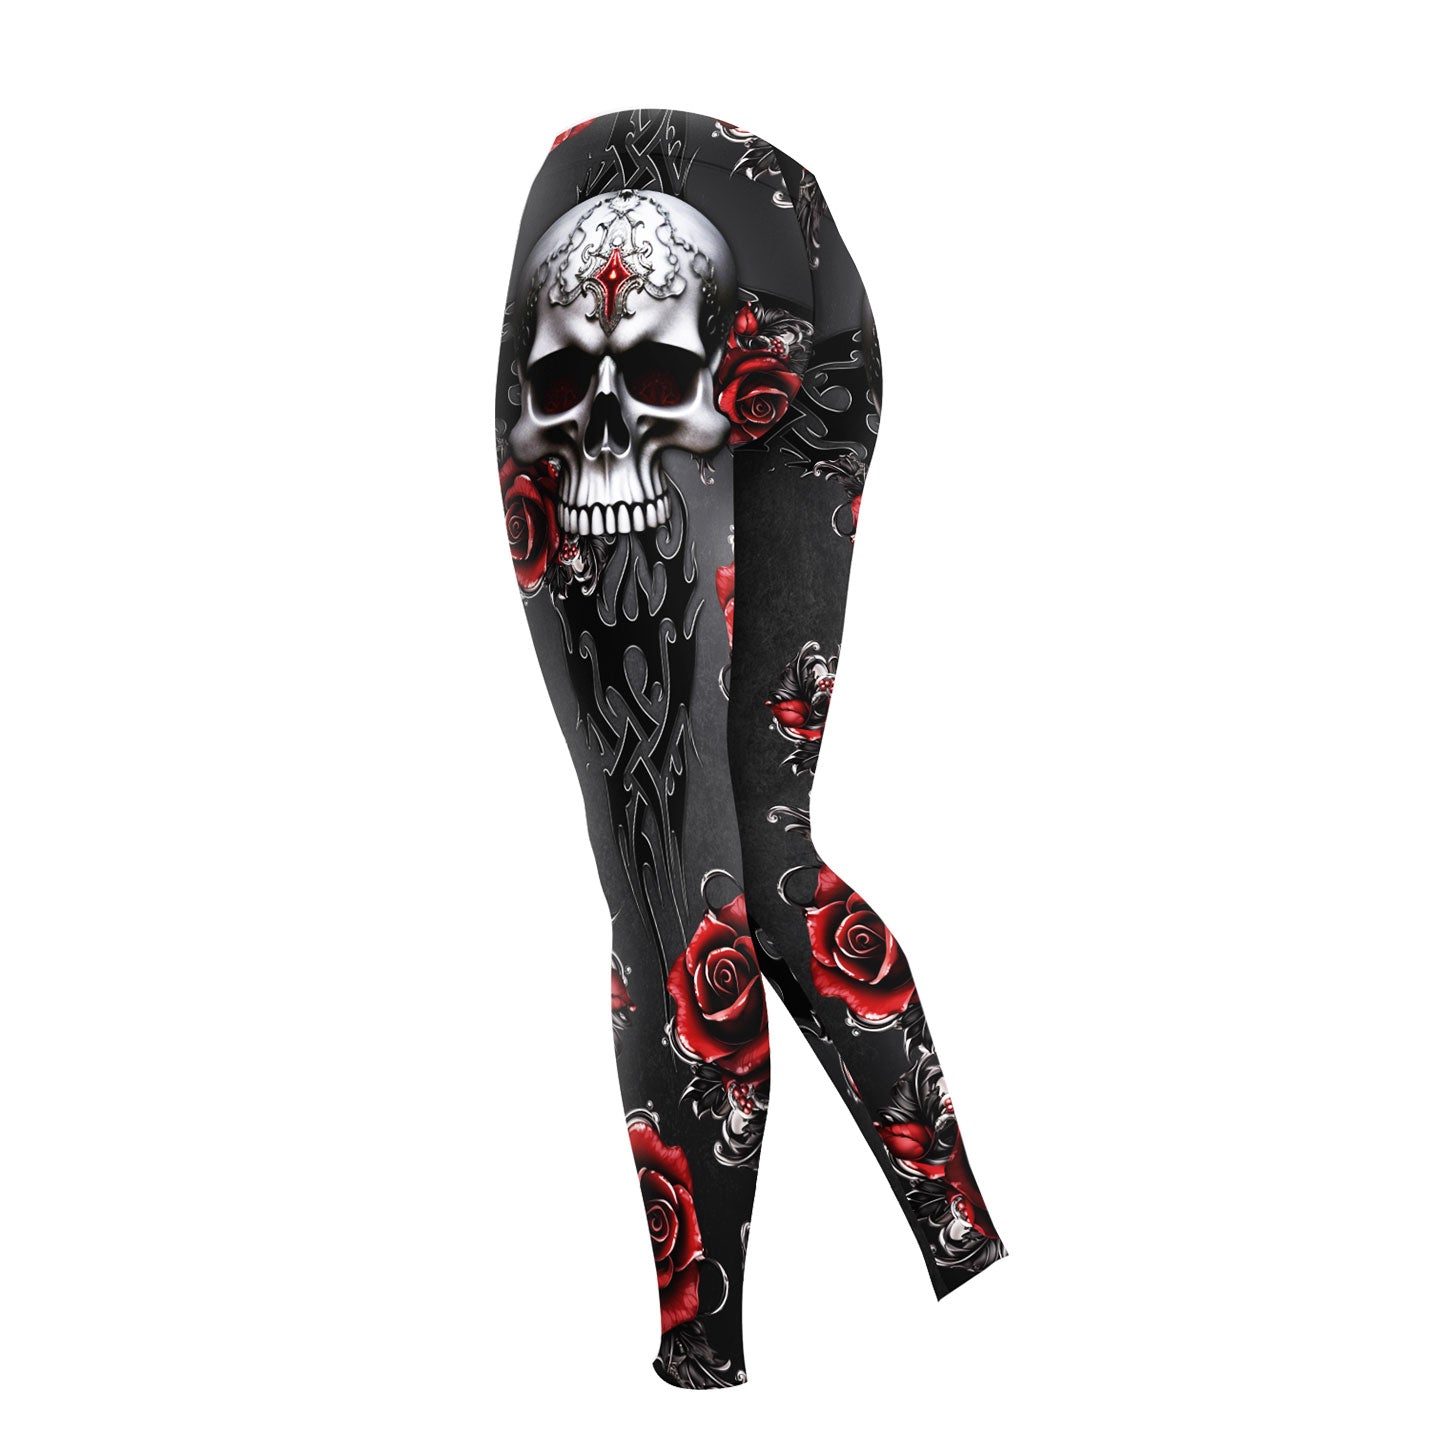 Skull Thorn Rose Gothic Combo Hoodie and Leggings - Dark and edgy matching set with skull designs for a unique and stylish look.